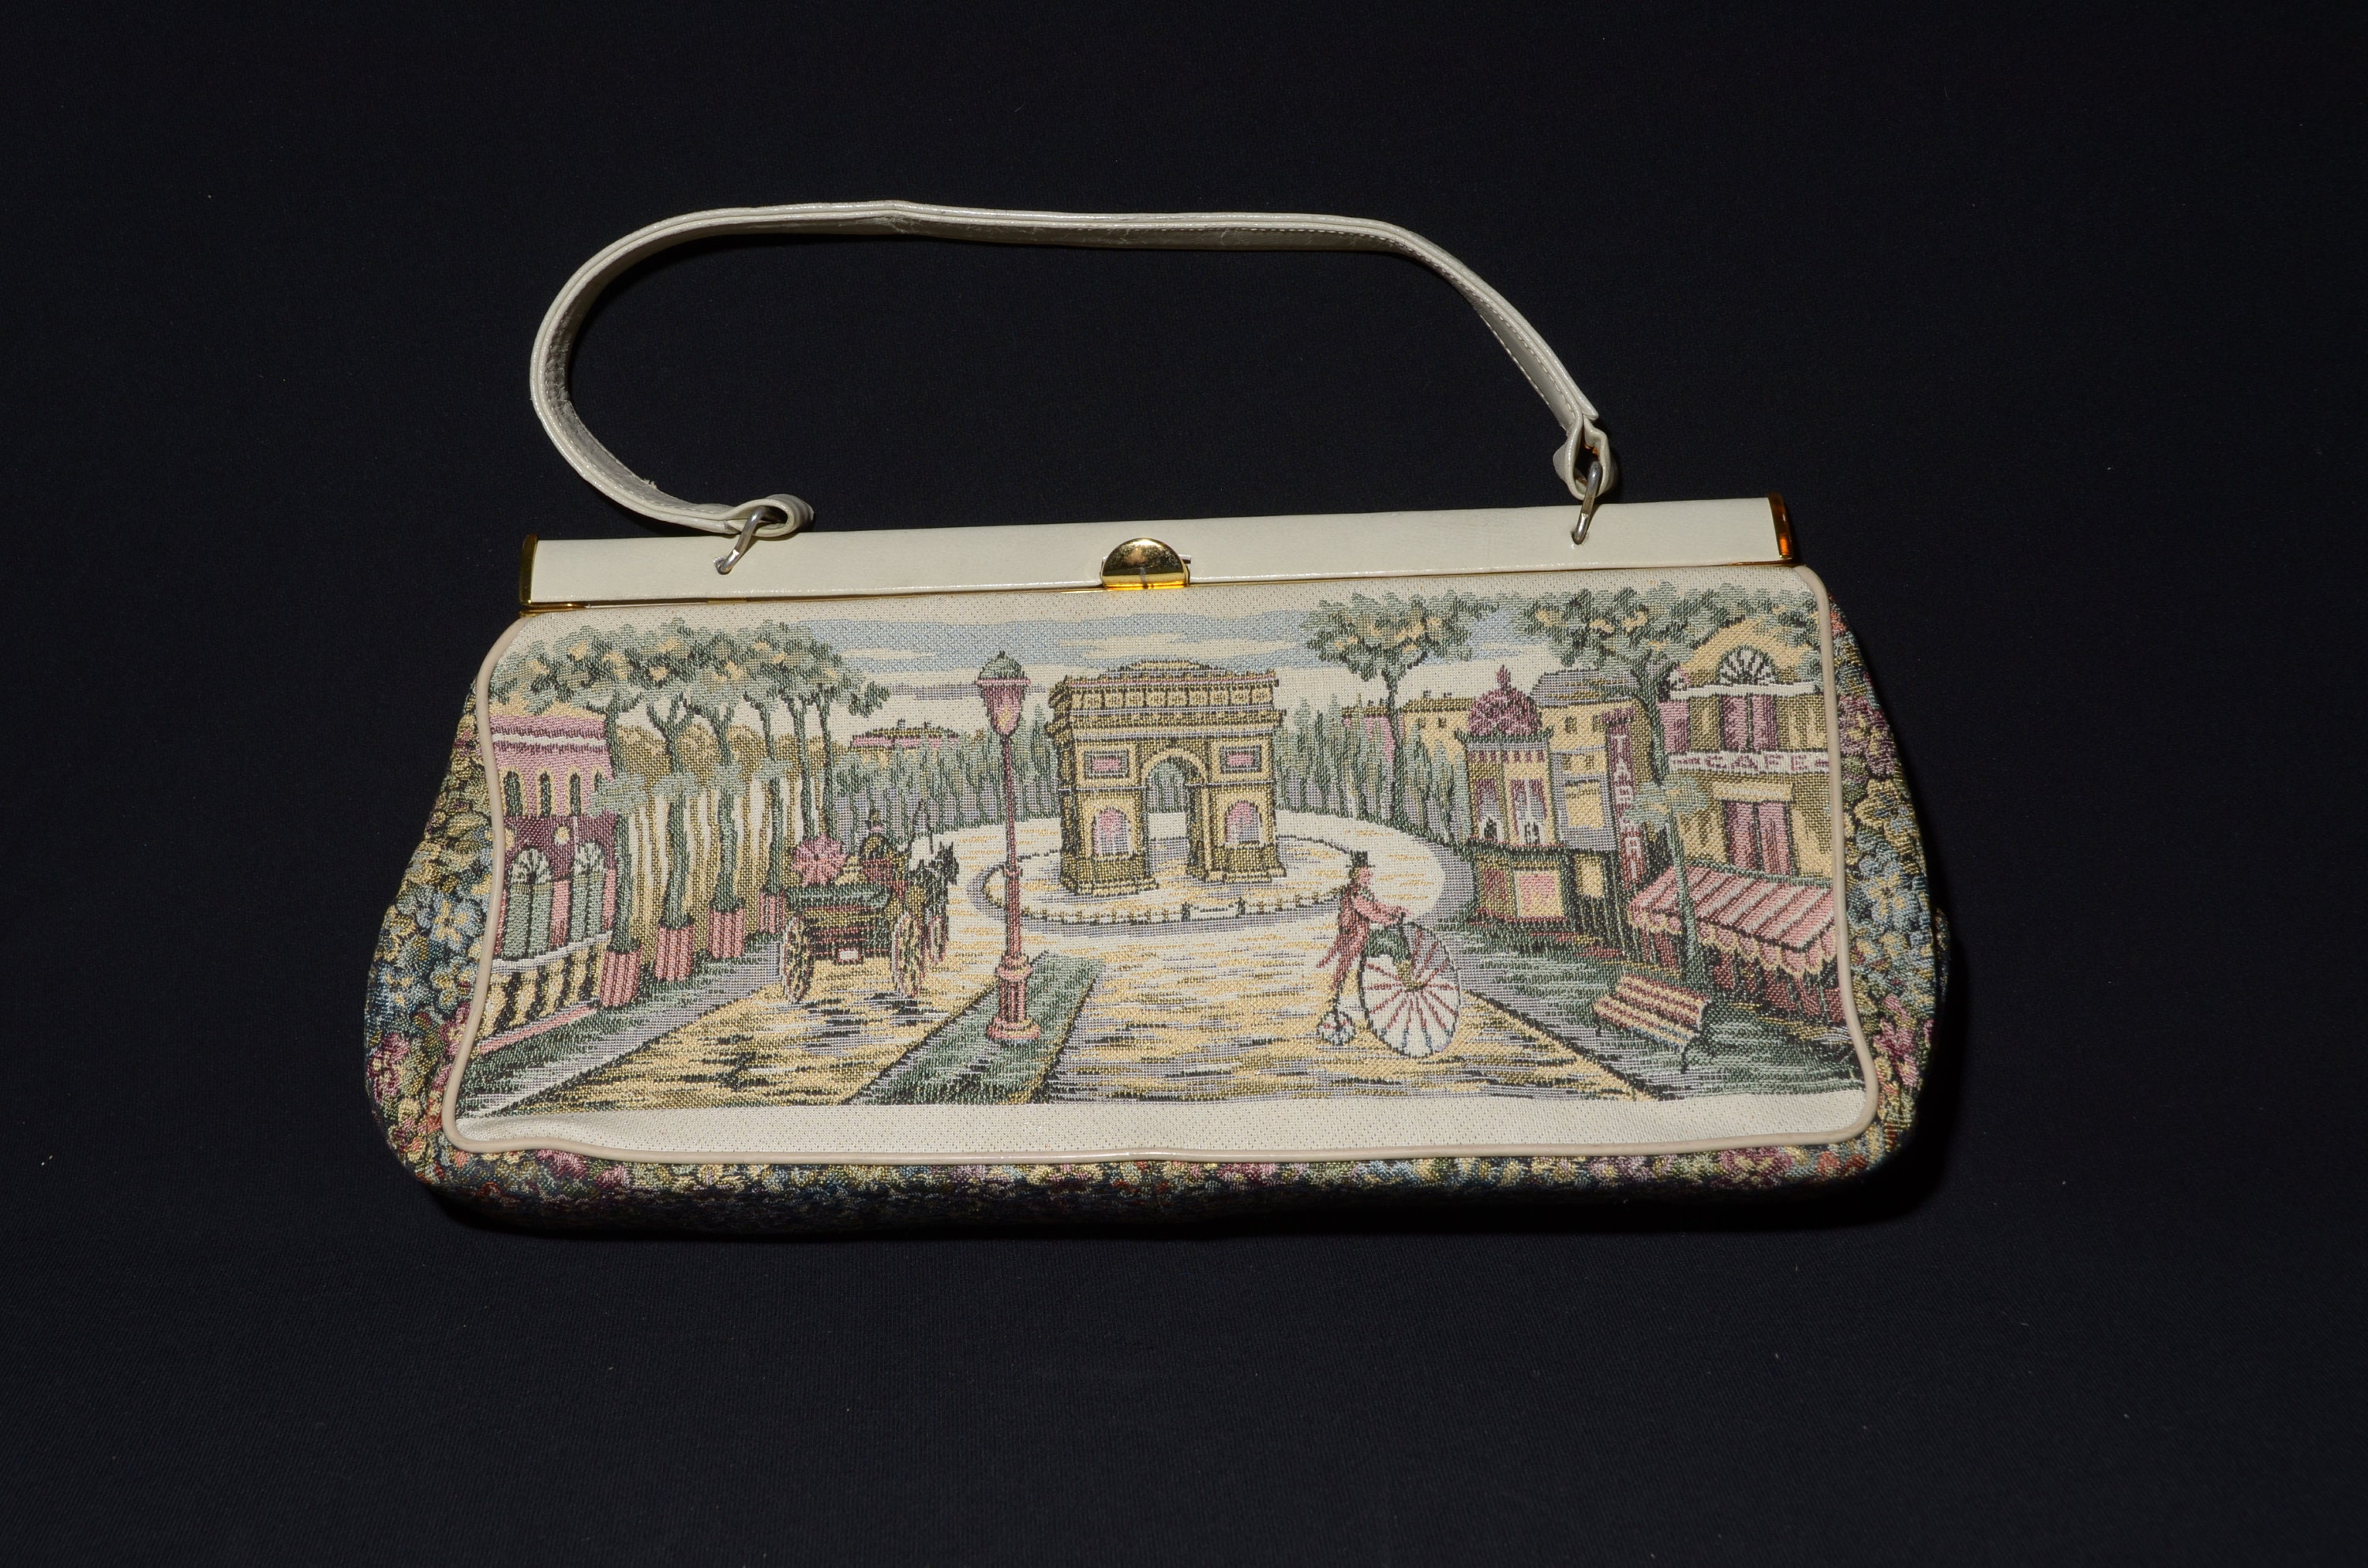 Vintage Handbag Italian Tapestry La Marquise C.1960 Embroidered Tapestry  Purse Arc De Triomphe Paris France Outdoor Scene Leather 